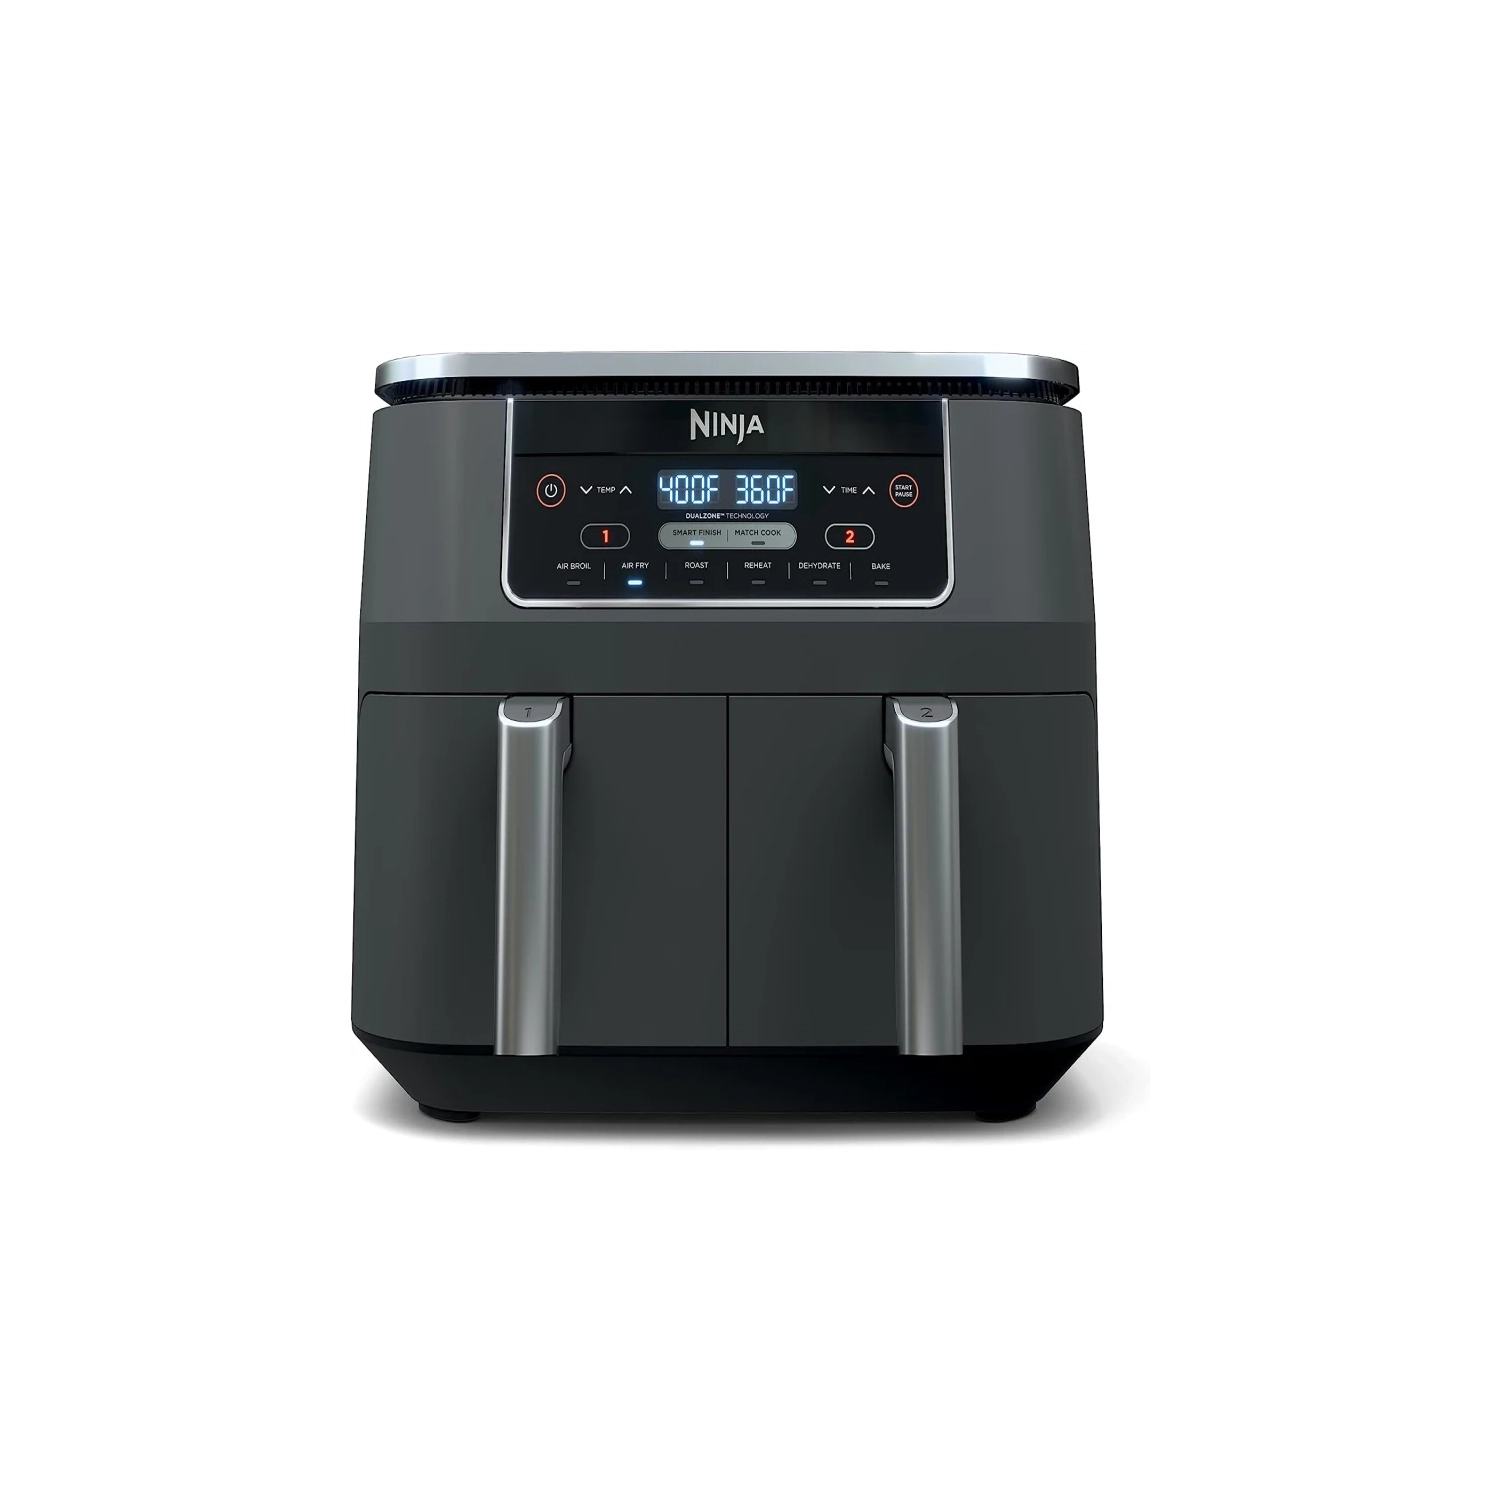 8-qt. Ninja Foodi 6-in-1 Air Fryer with DualZone Technology - Slate Grey (DZ201C) | Match Cook & Smart Finish, Roast, Broil, Dehydrate & More - Canadian Version